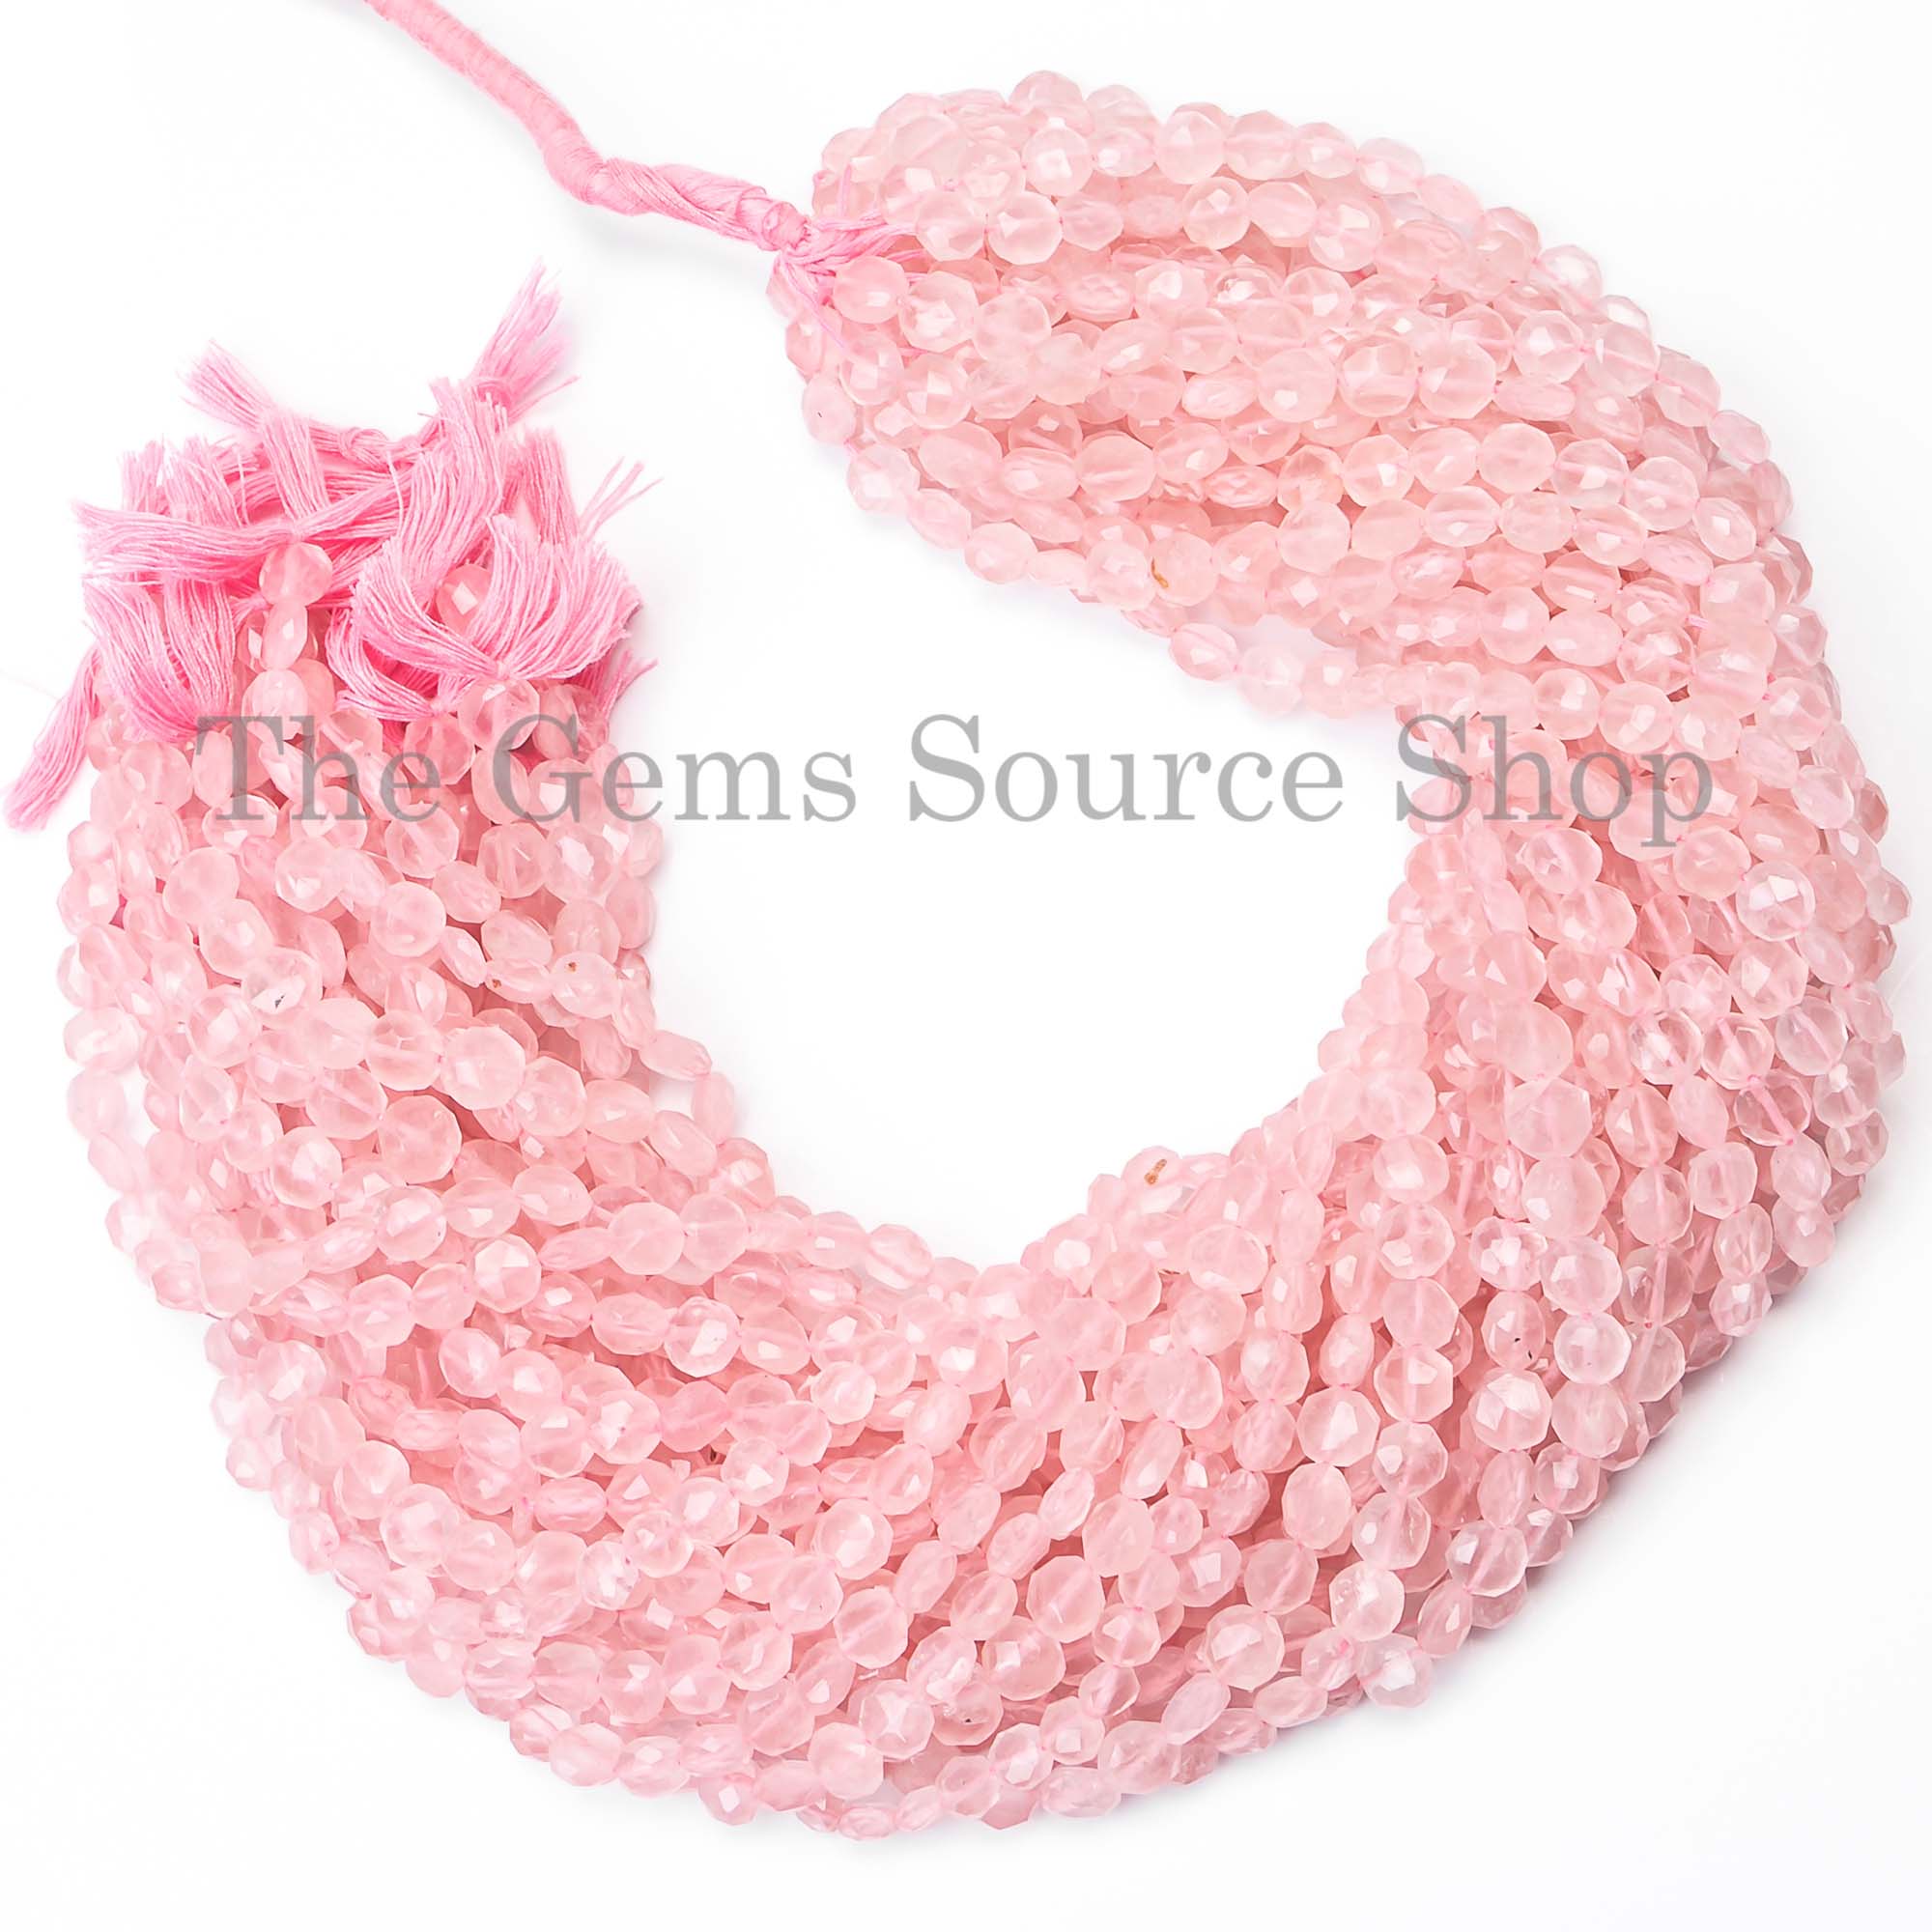 6-8mm Rose Quartz Faceted Coin Shape Beads, Pink Rose Quartz Beads, Coin Shape Beads